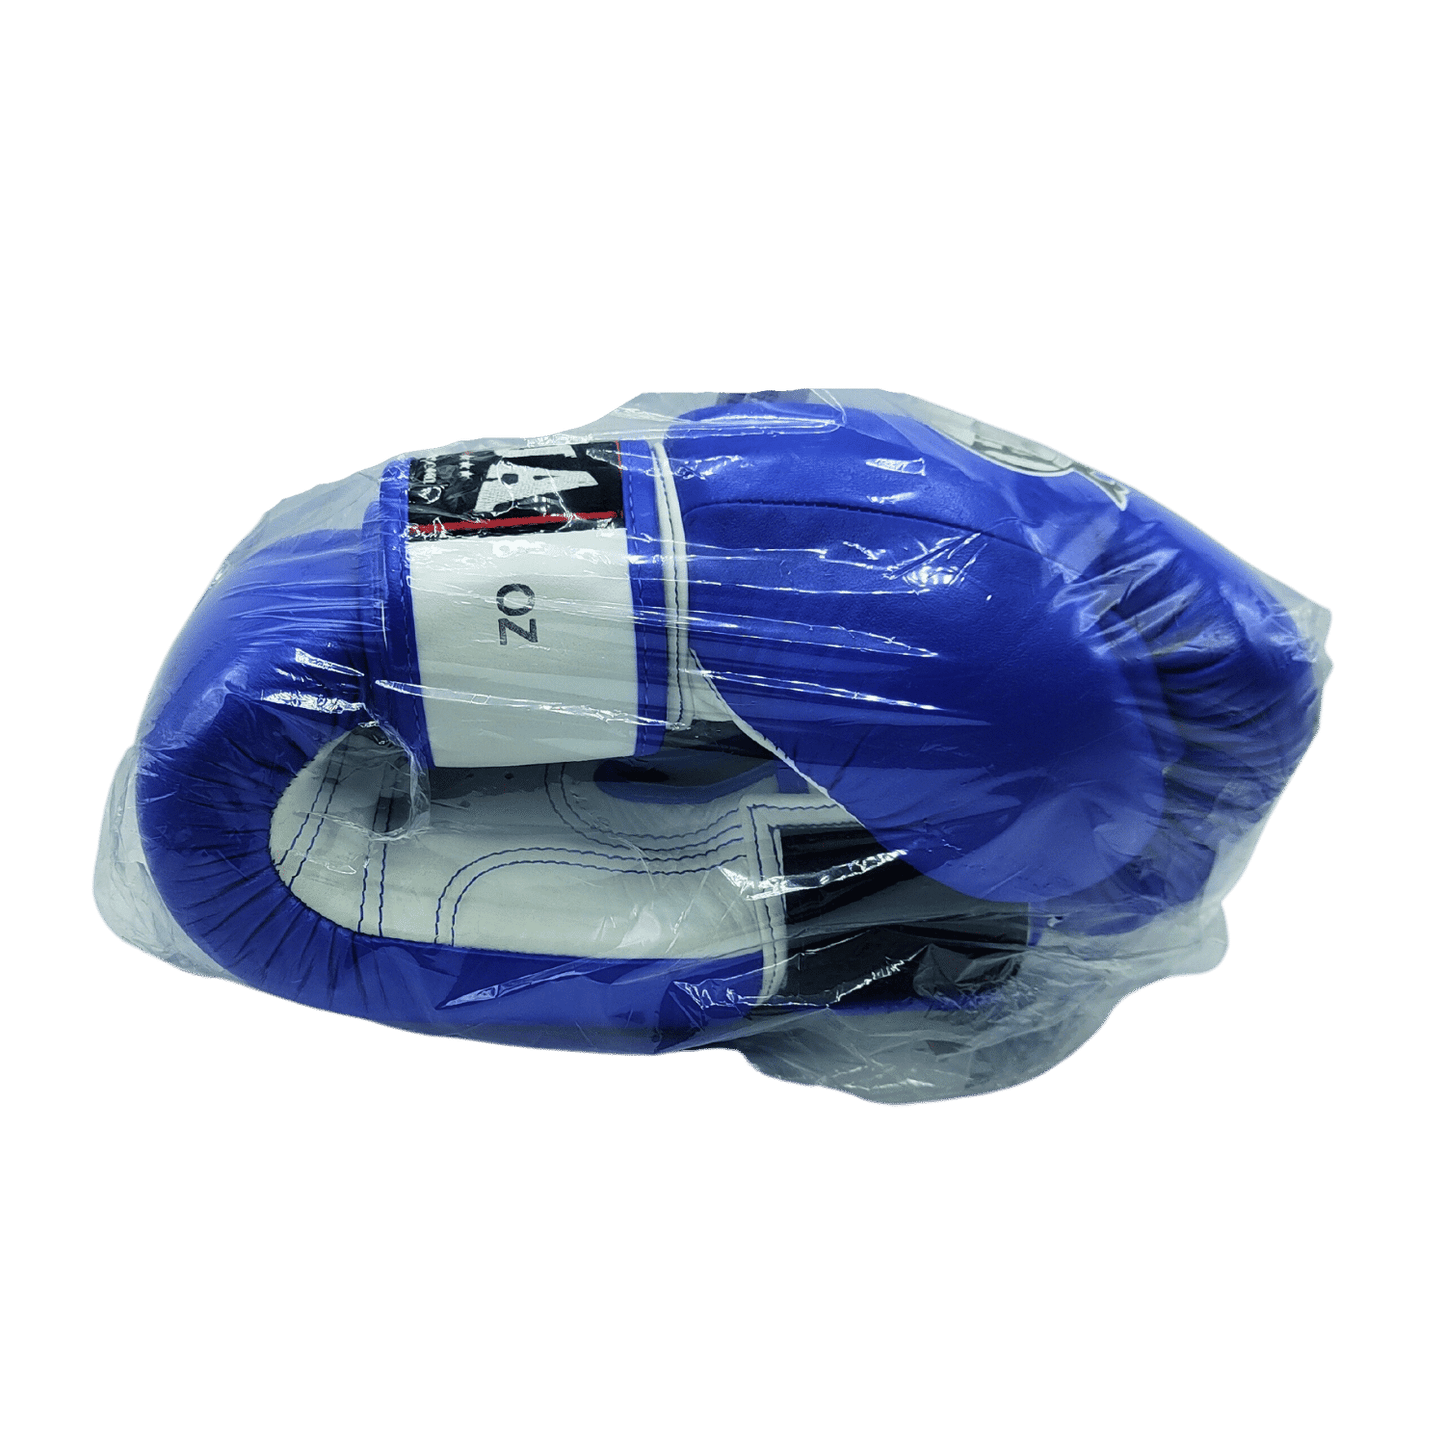 A pair of Raja Duo Colour 8oz Boxing Gloves - Blue & White by Raja in a plastic bag.